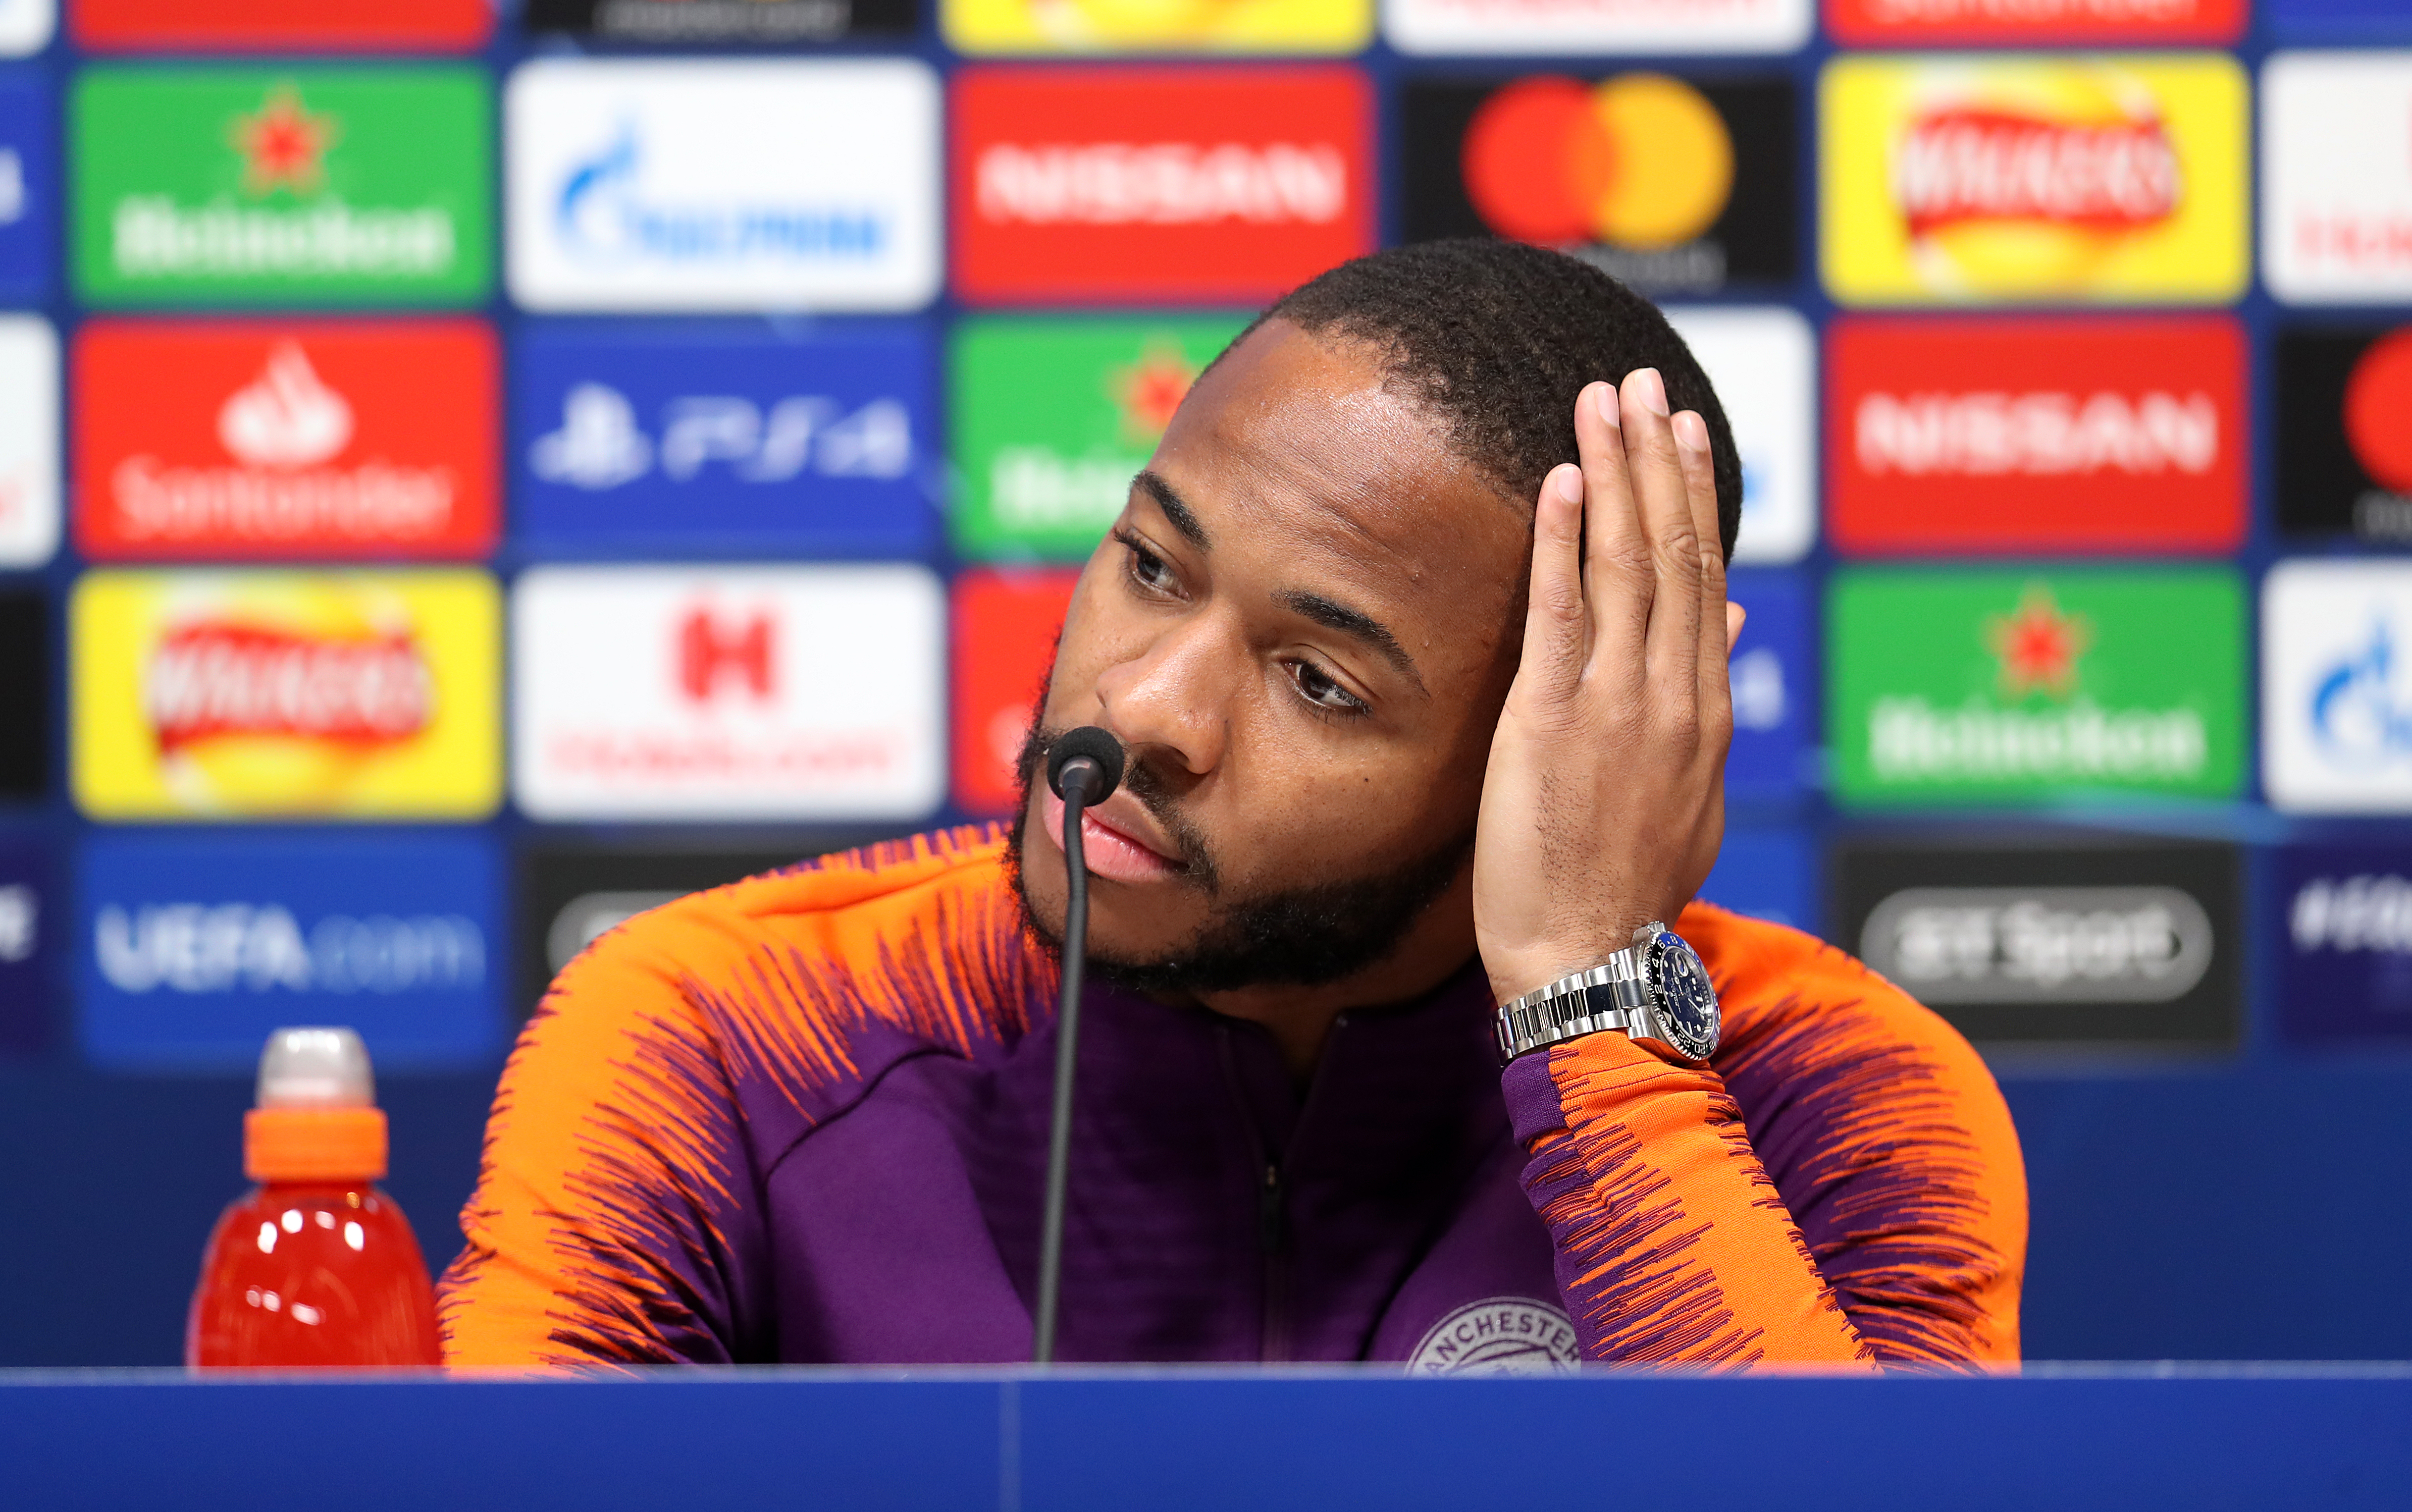 Manchester City's Raheem Sterling during the press conference at Tottenham Hotspur Stadium, London